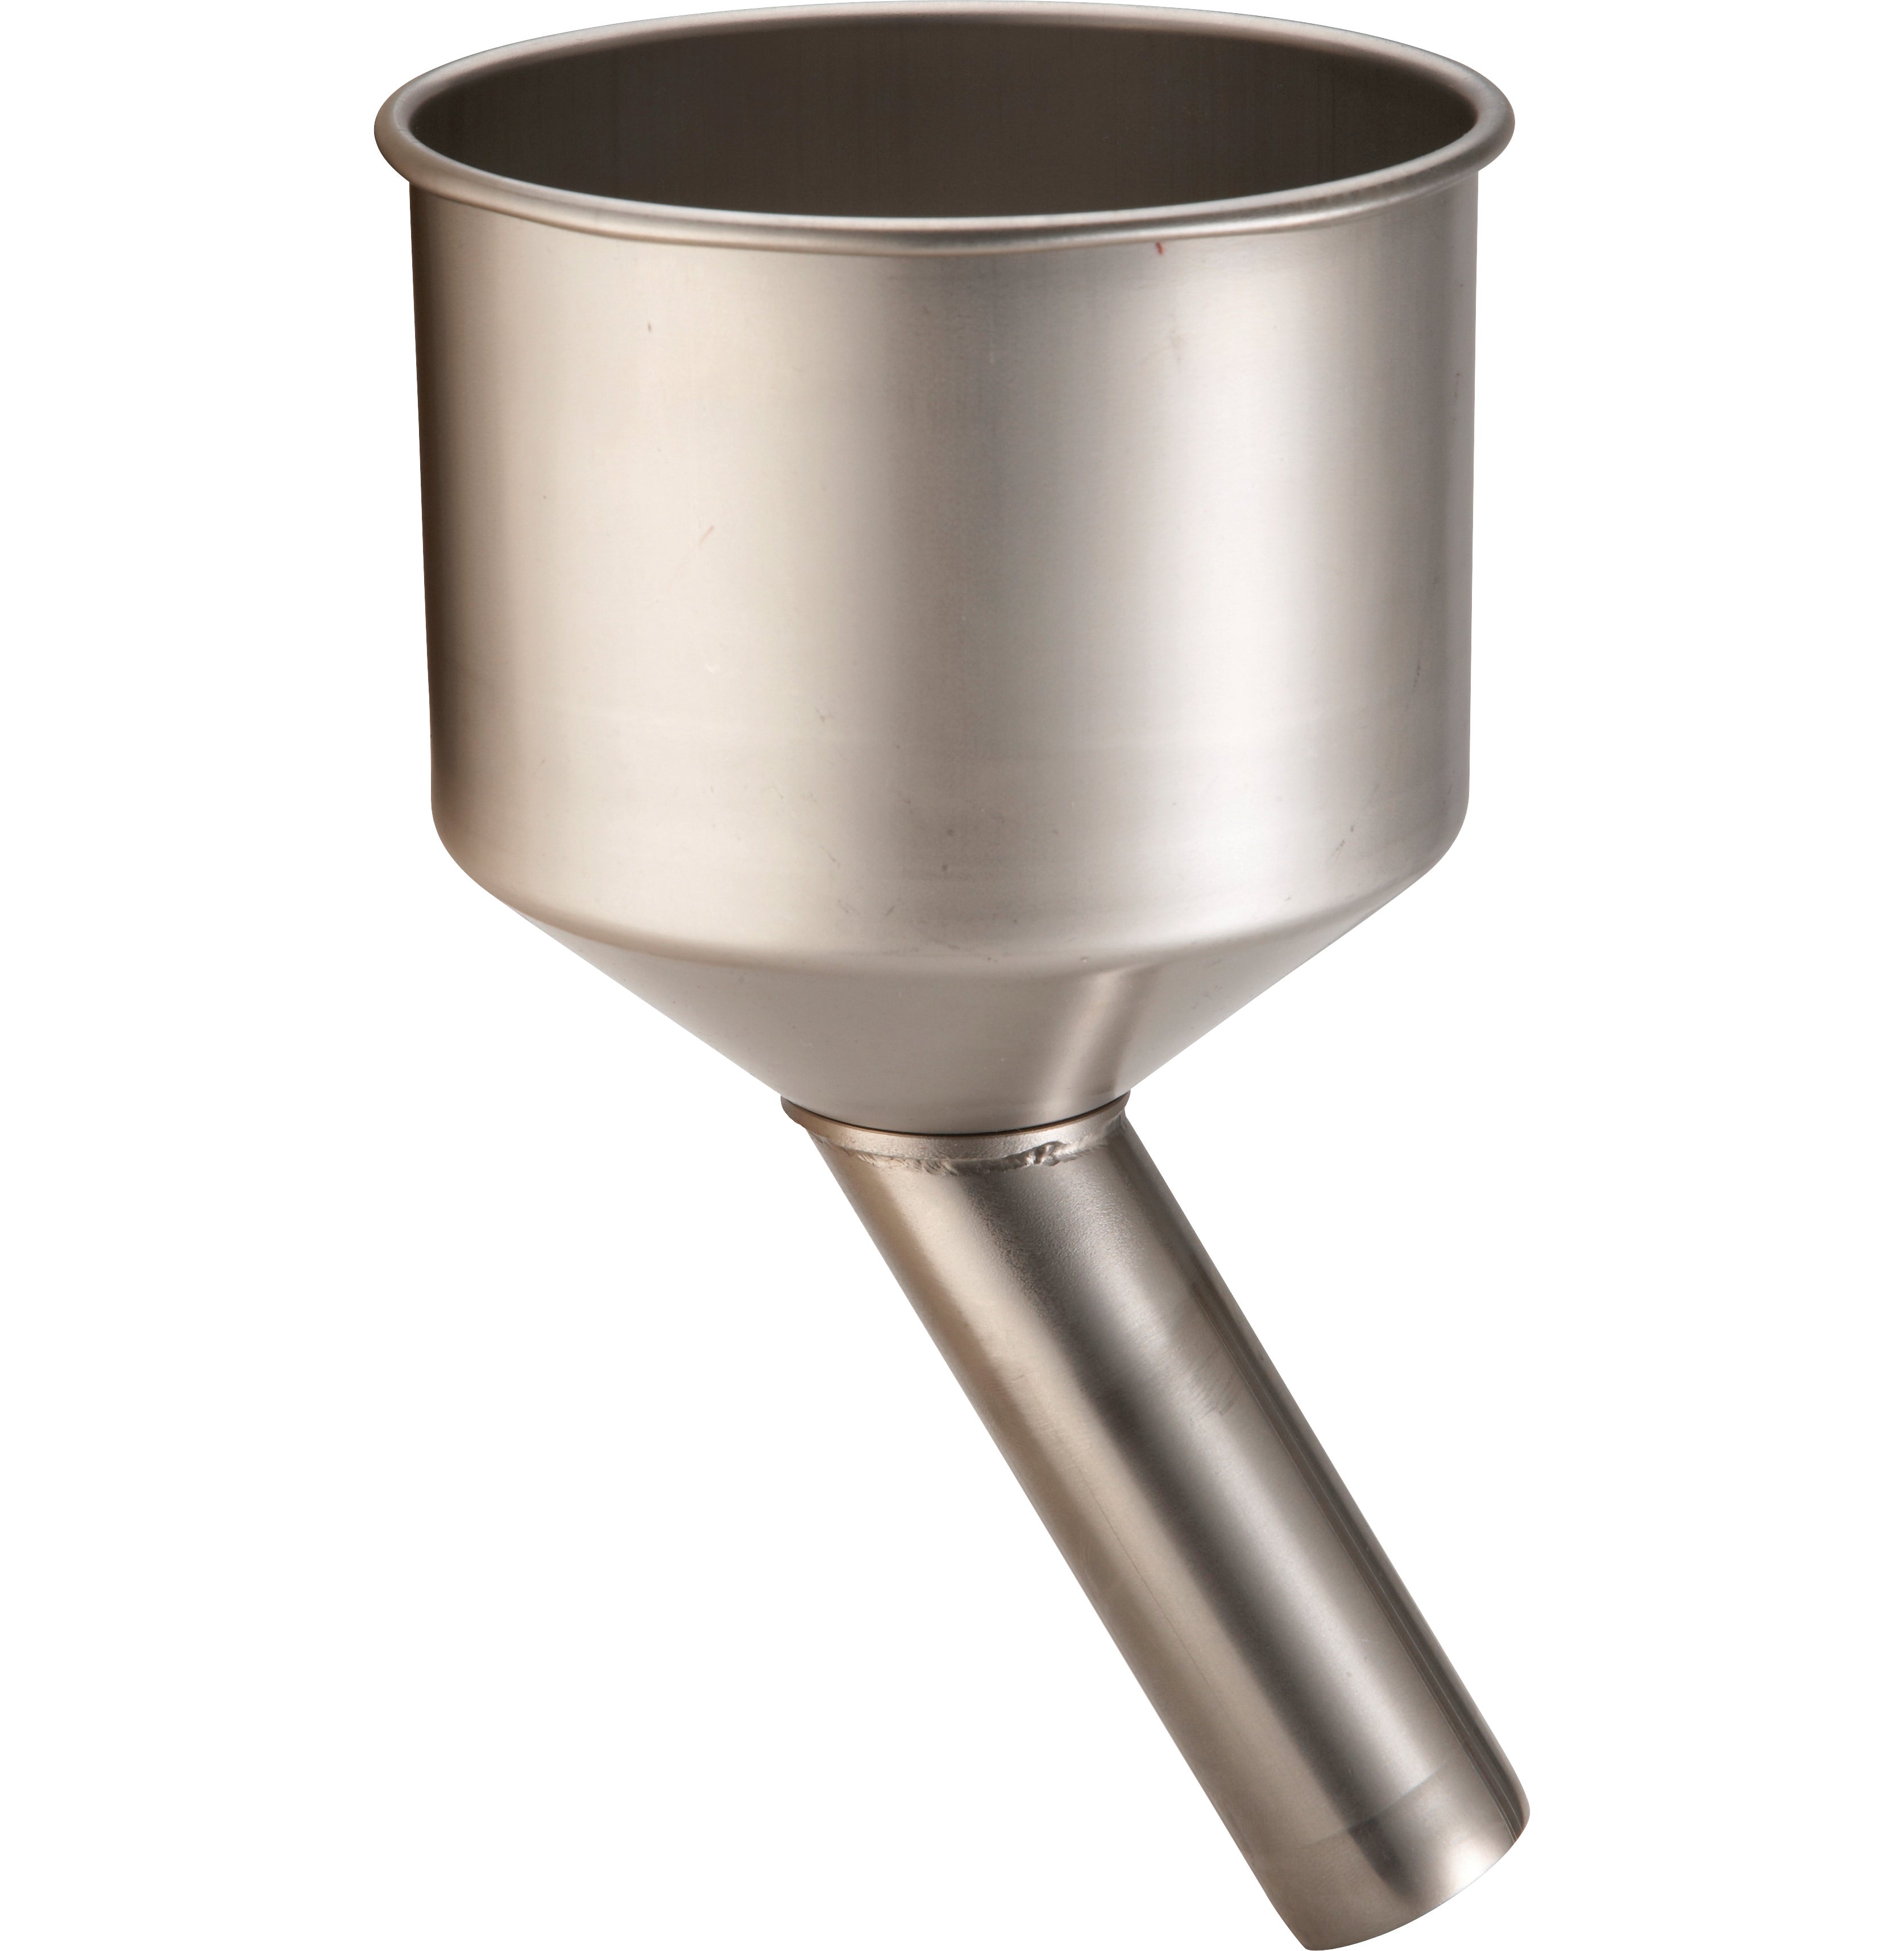 Funnel st.steel 1.4301, stainless steel 1.431 polished